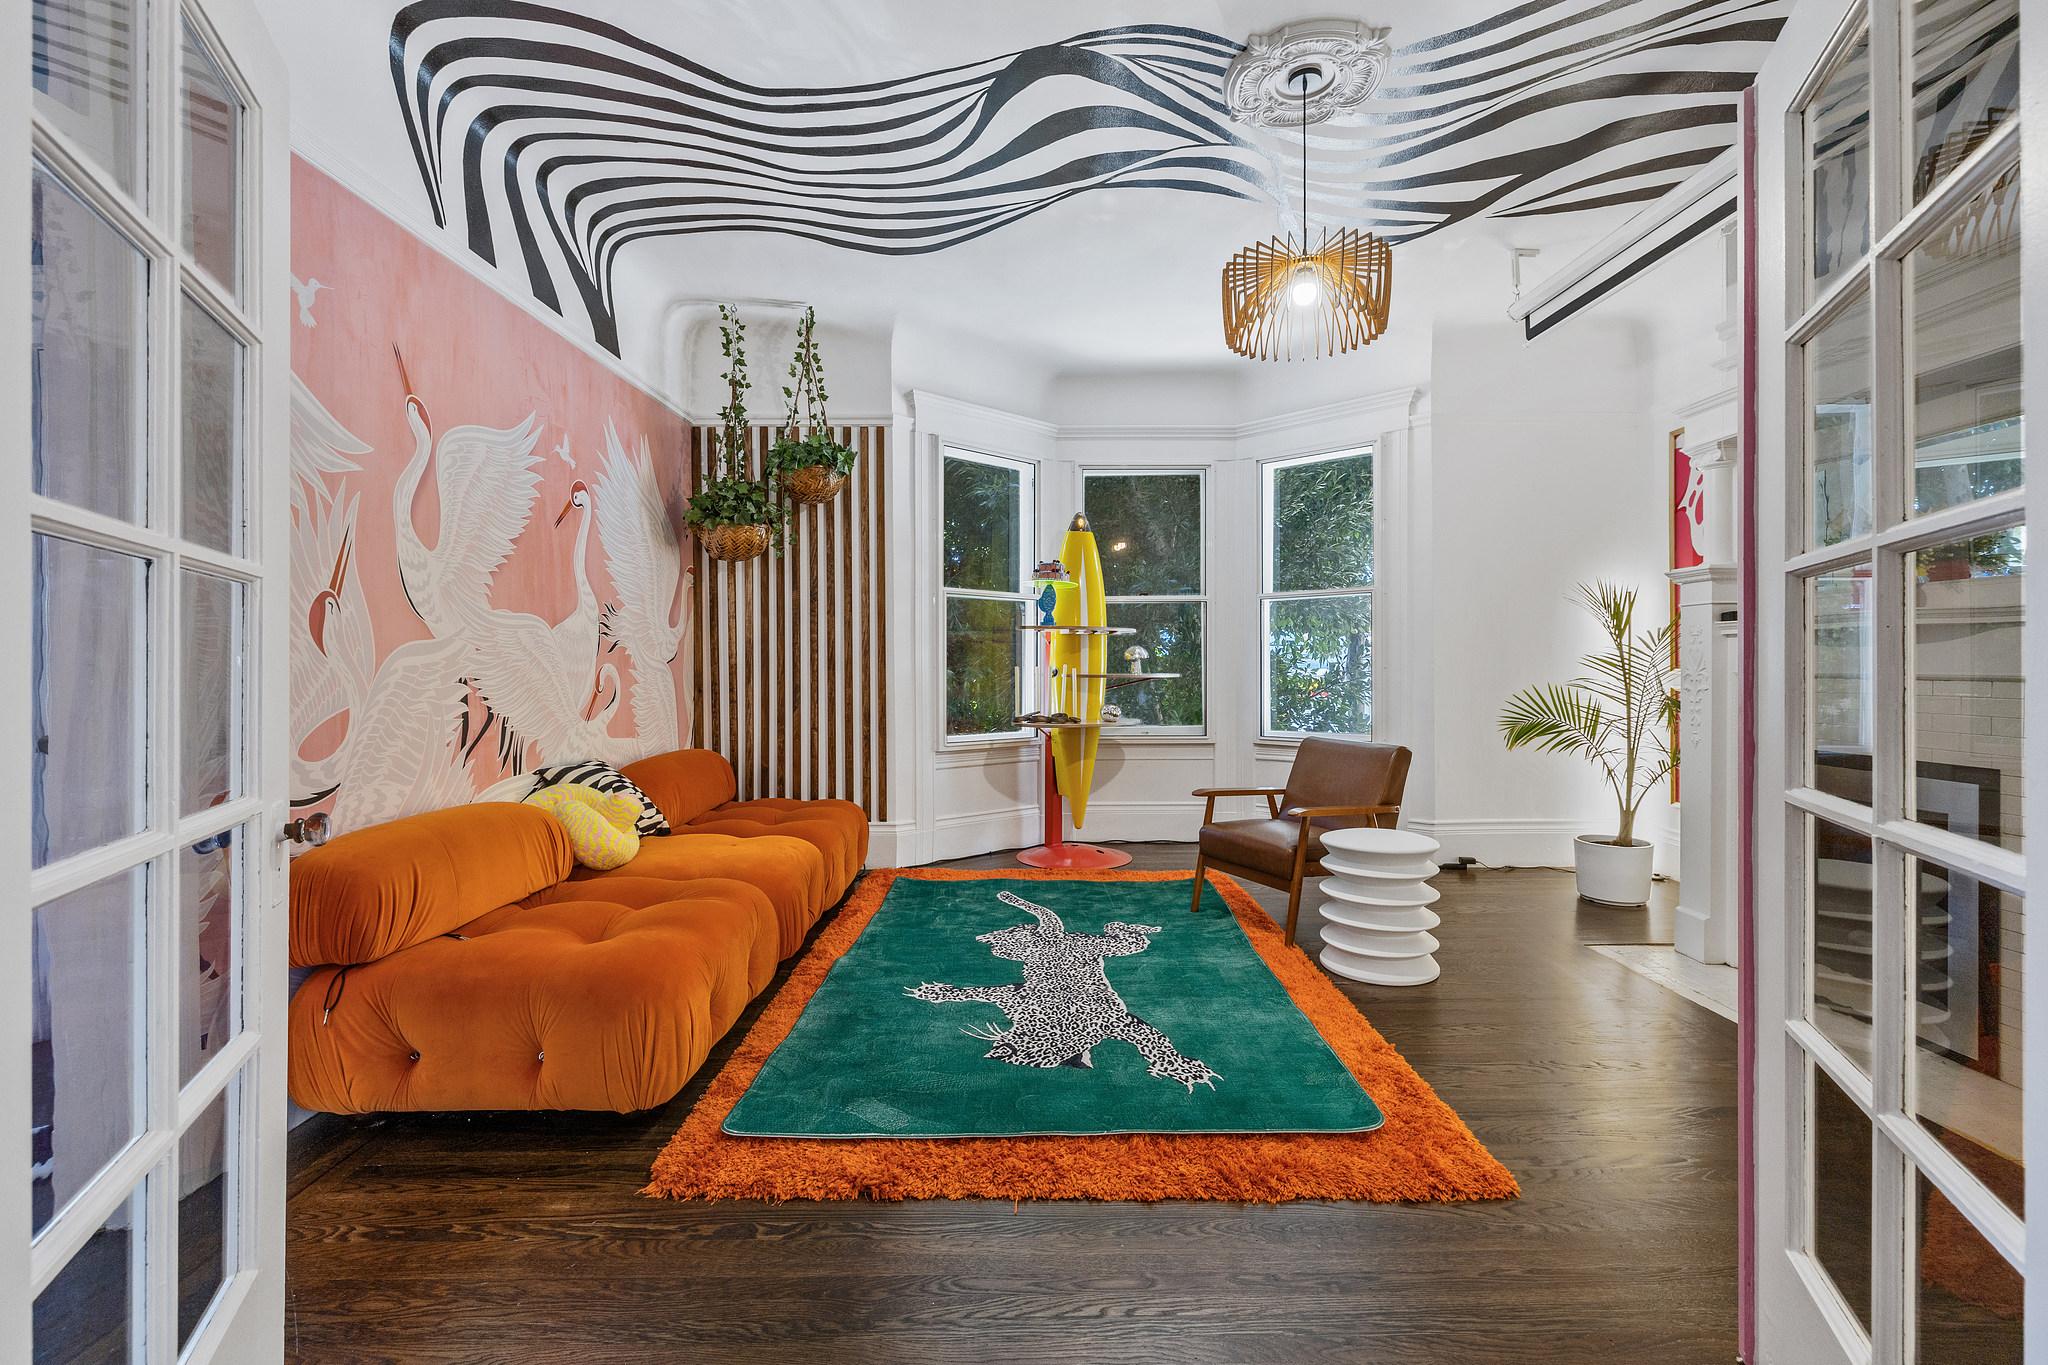 Mid Century Modern Home Style, Welcome Mat, Flamingo, Palm Trees, Retr –  Mid Century Modern Gal